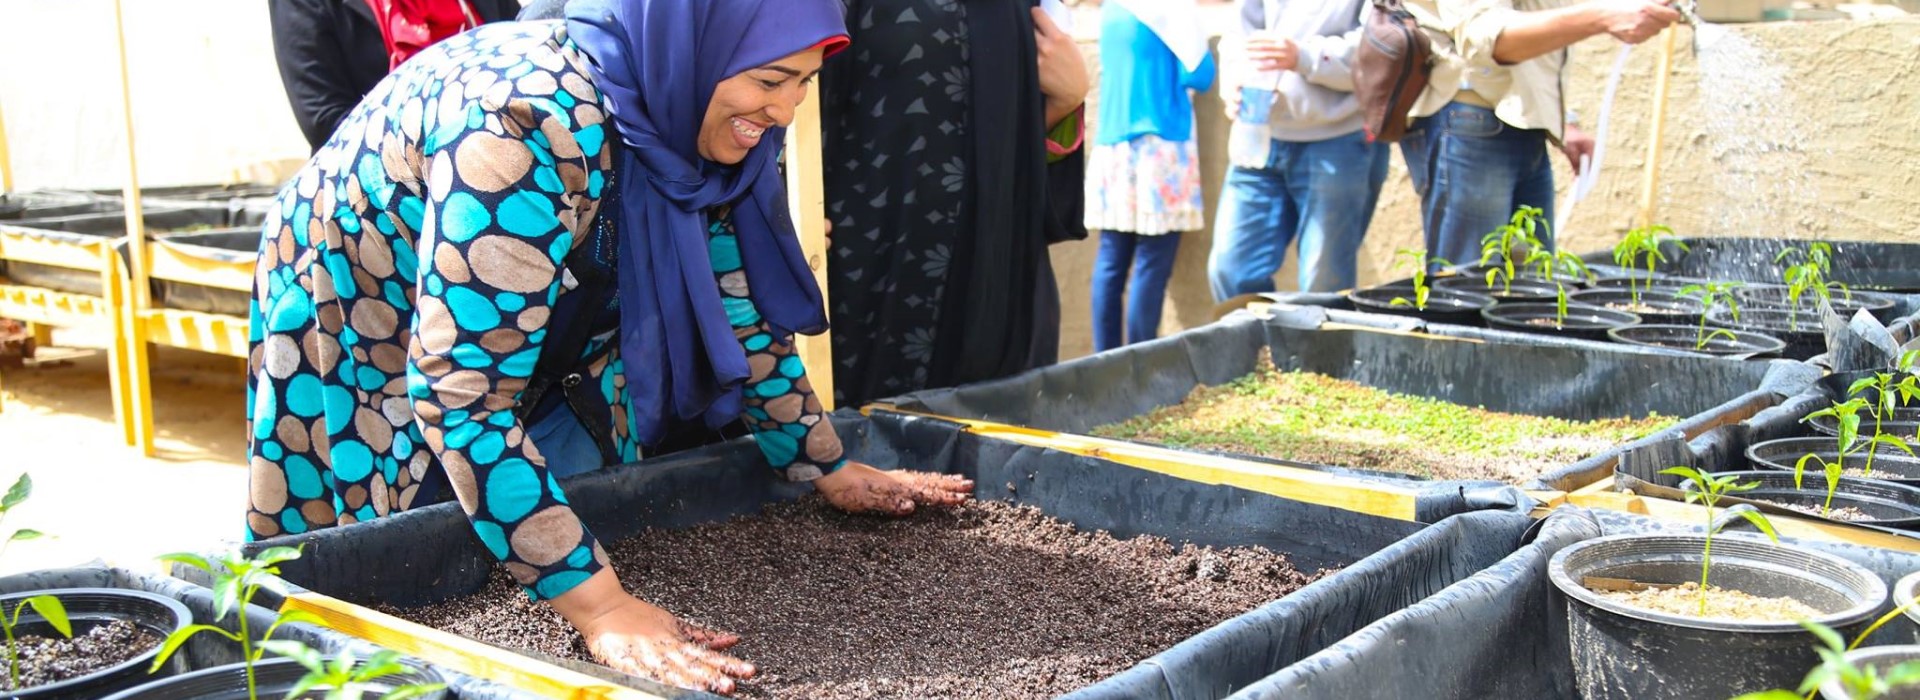 A person in a blue head scarf touching a tray of dirt.